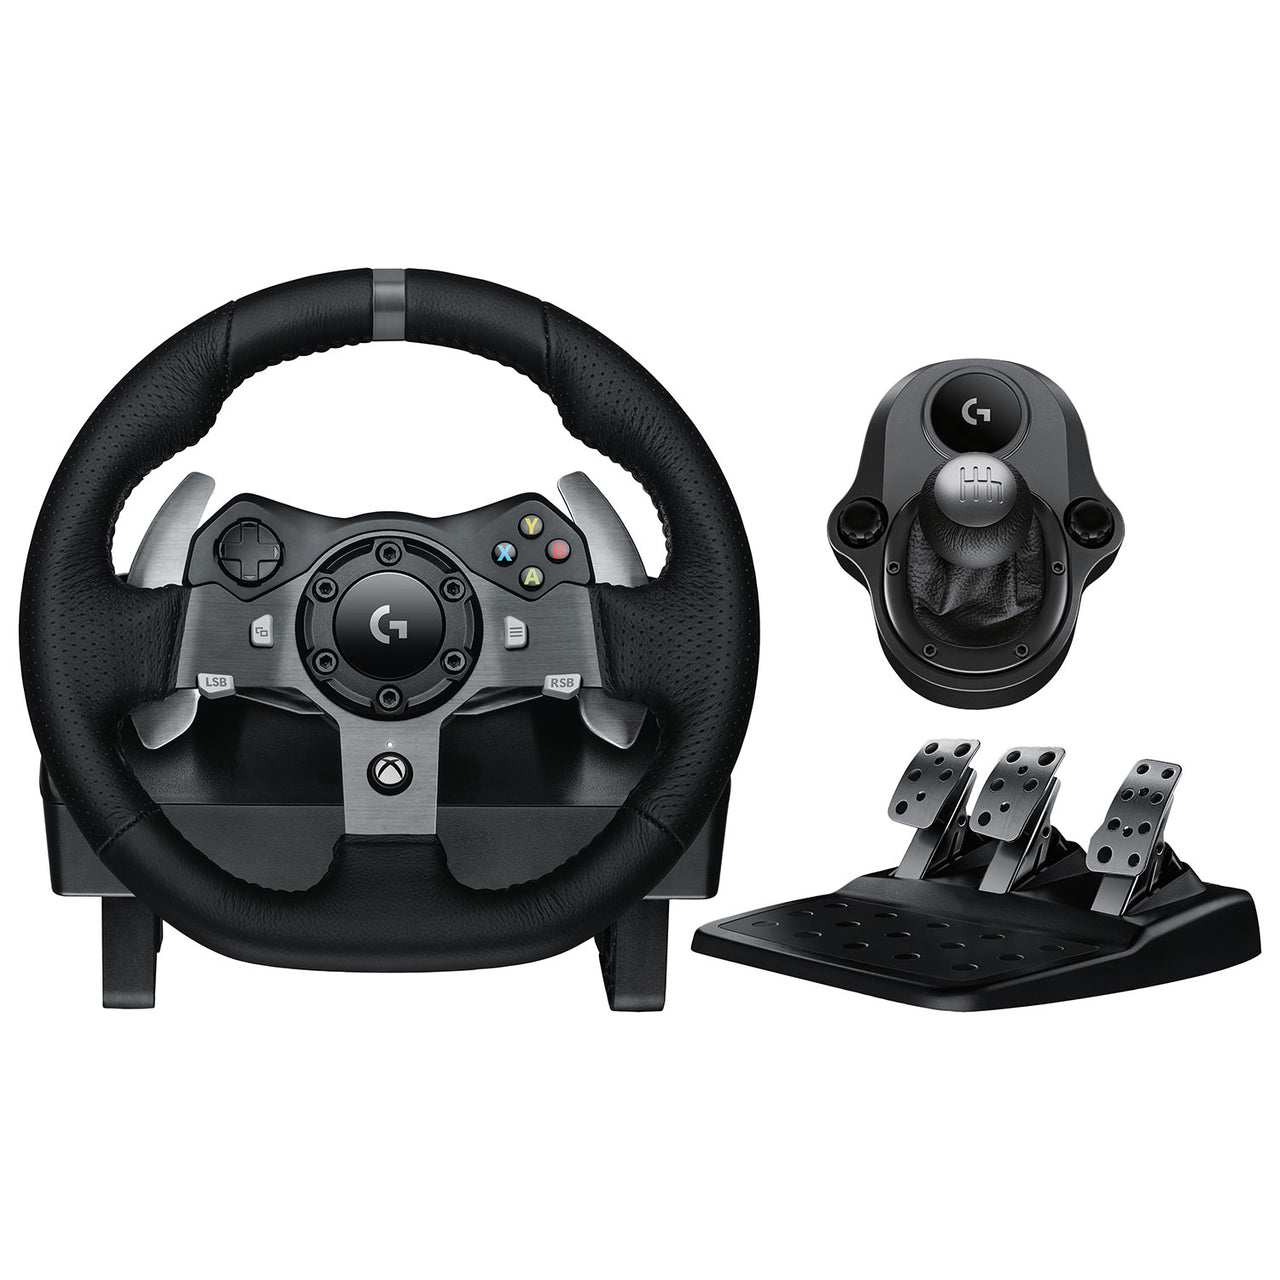 Logitech G920 Driving Force Racing Wheel with Shifter for Xbox/PC - Dark